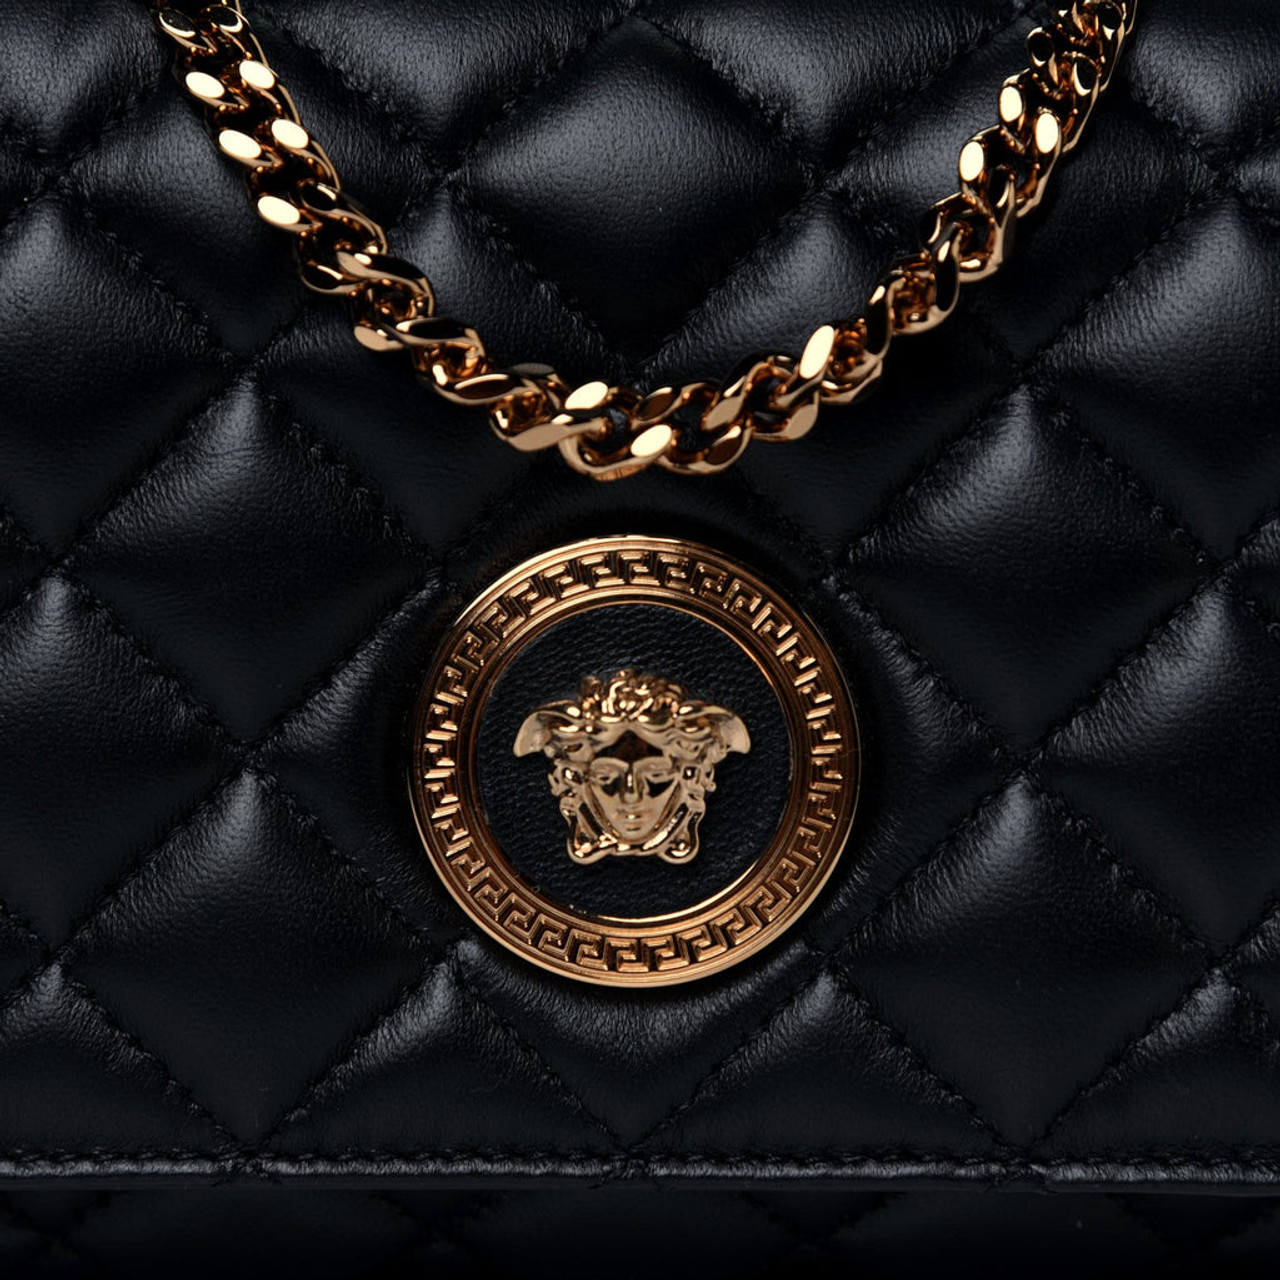 Medusa Nappa Quilted Leather Chain Crossbody